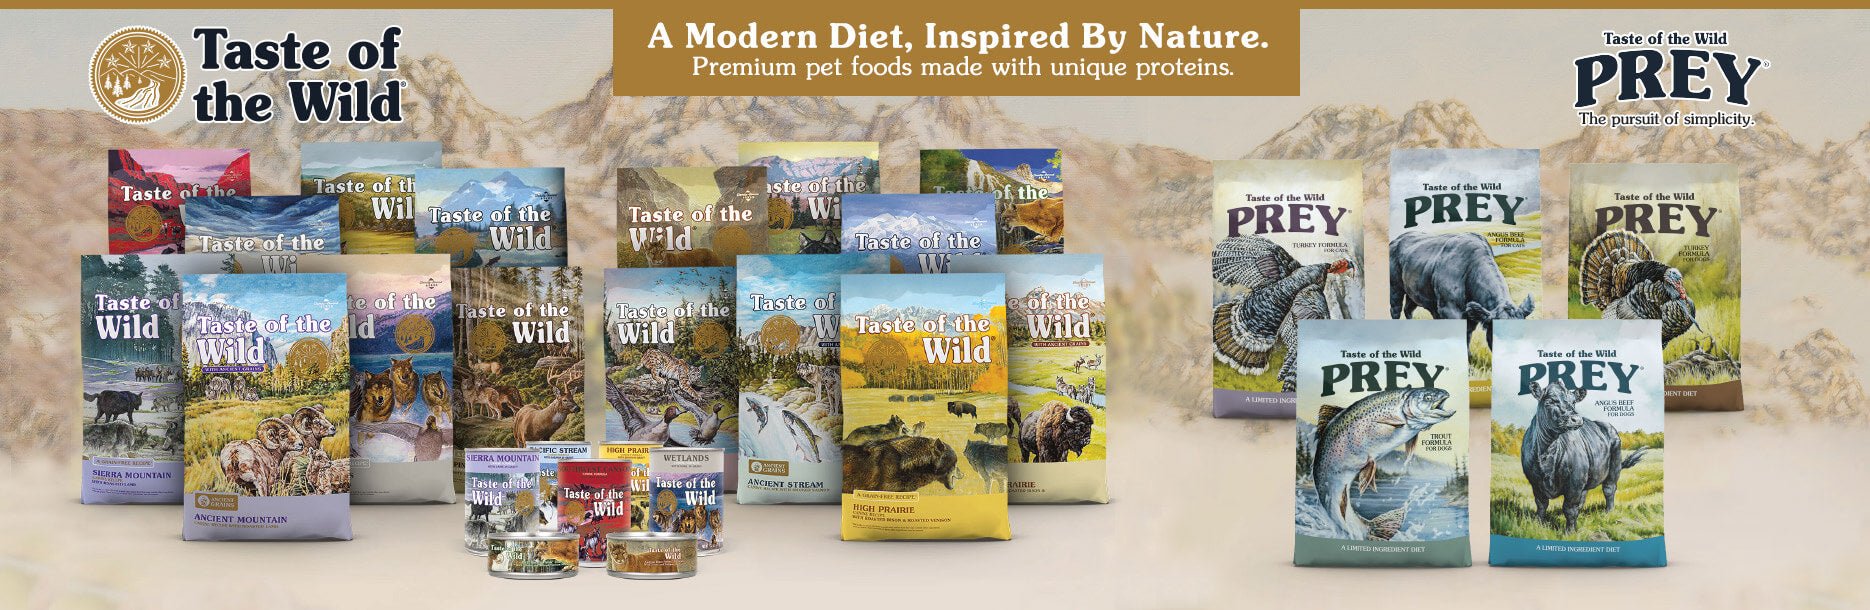 Taste of the Wild, a company that produces high-quality, grain-free pet food inspired by the diet of wild animals